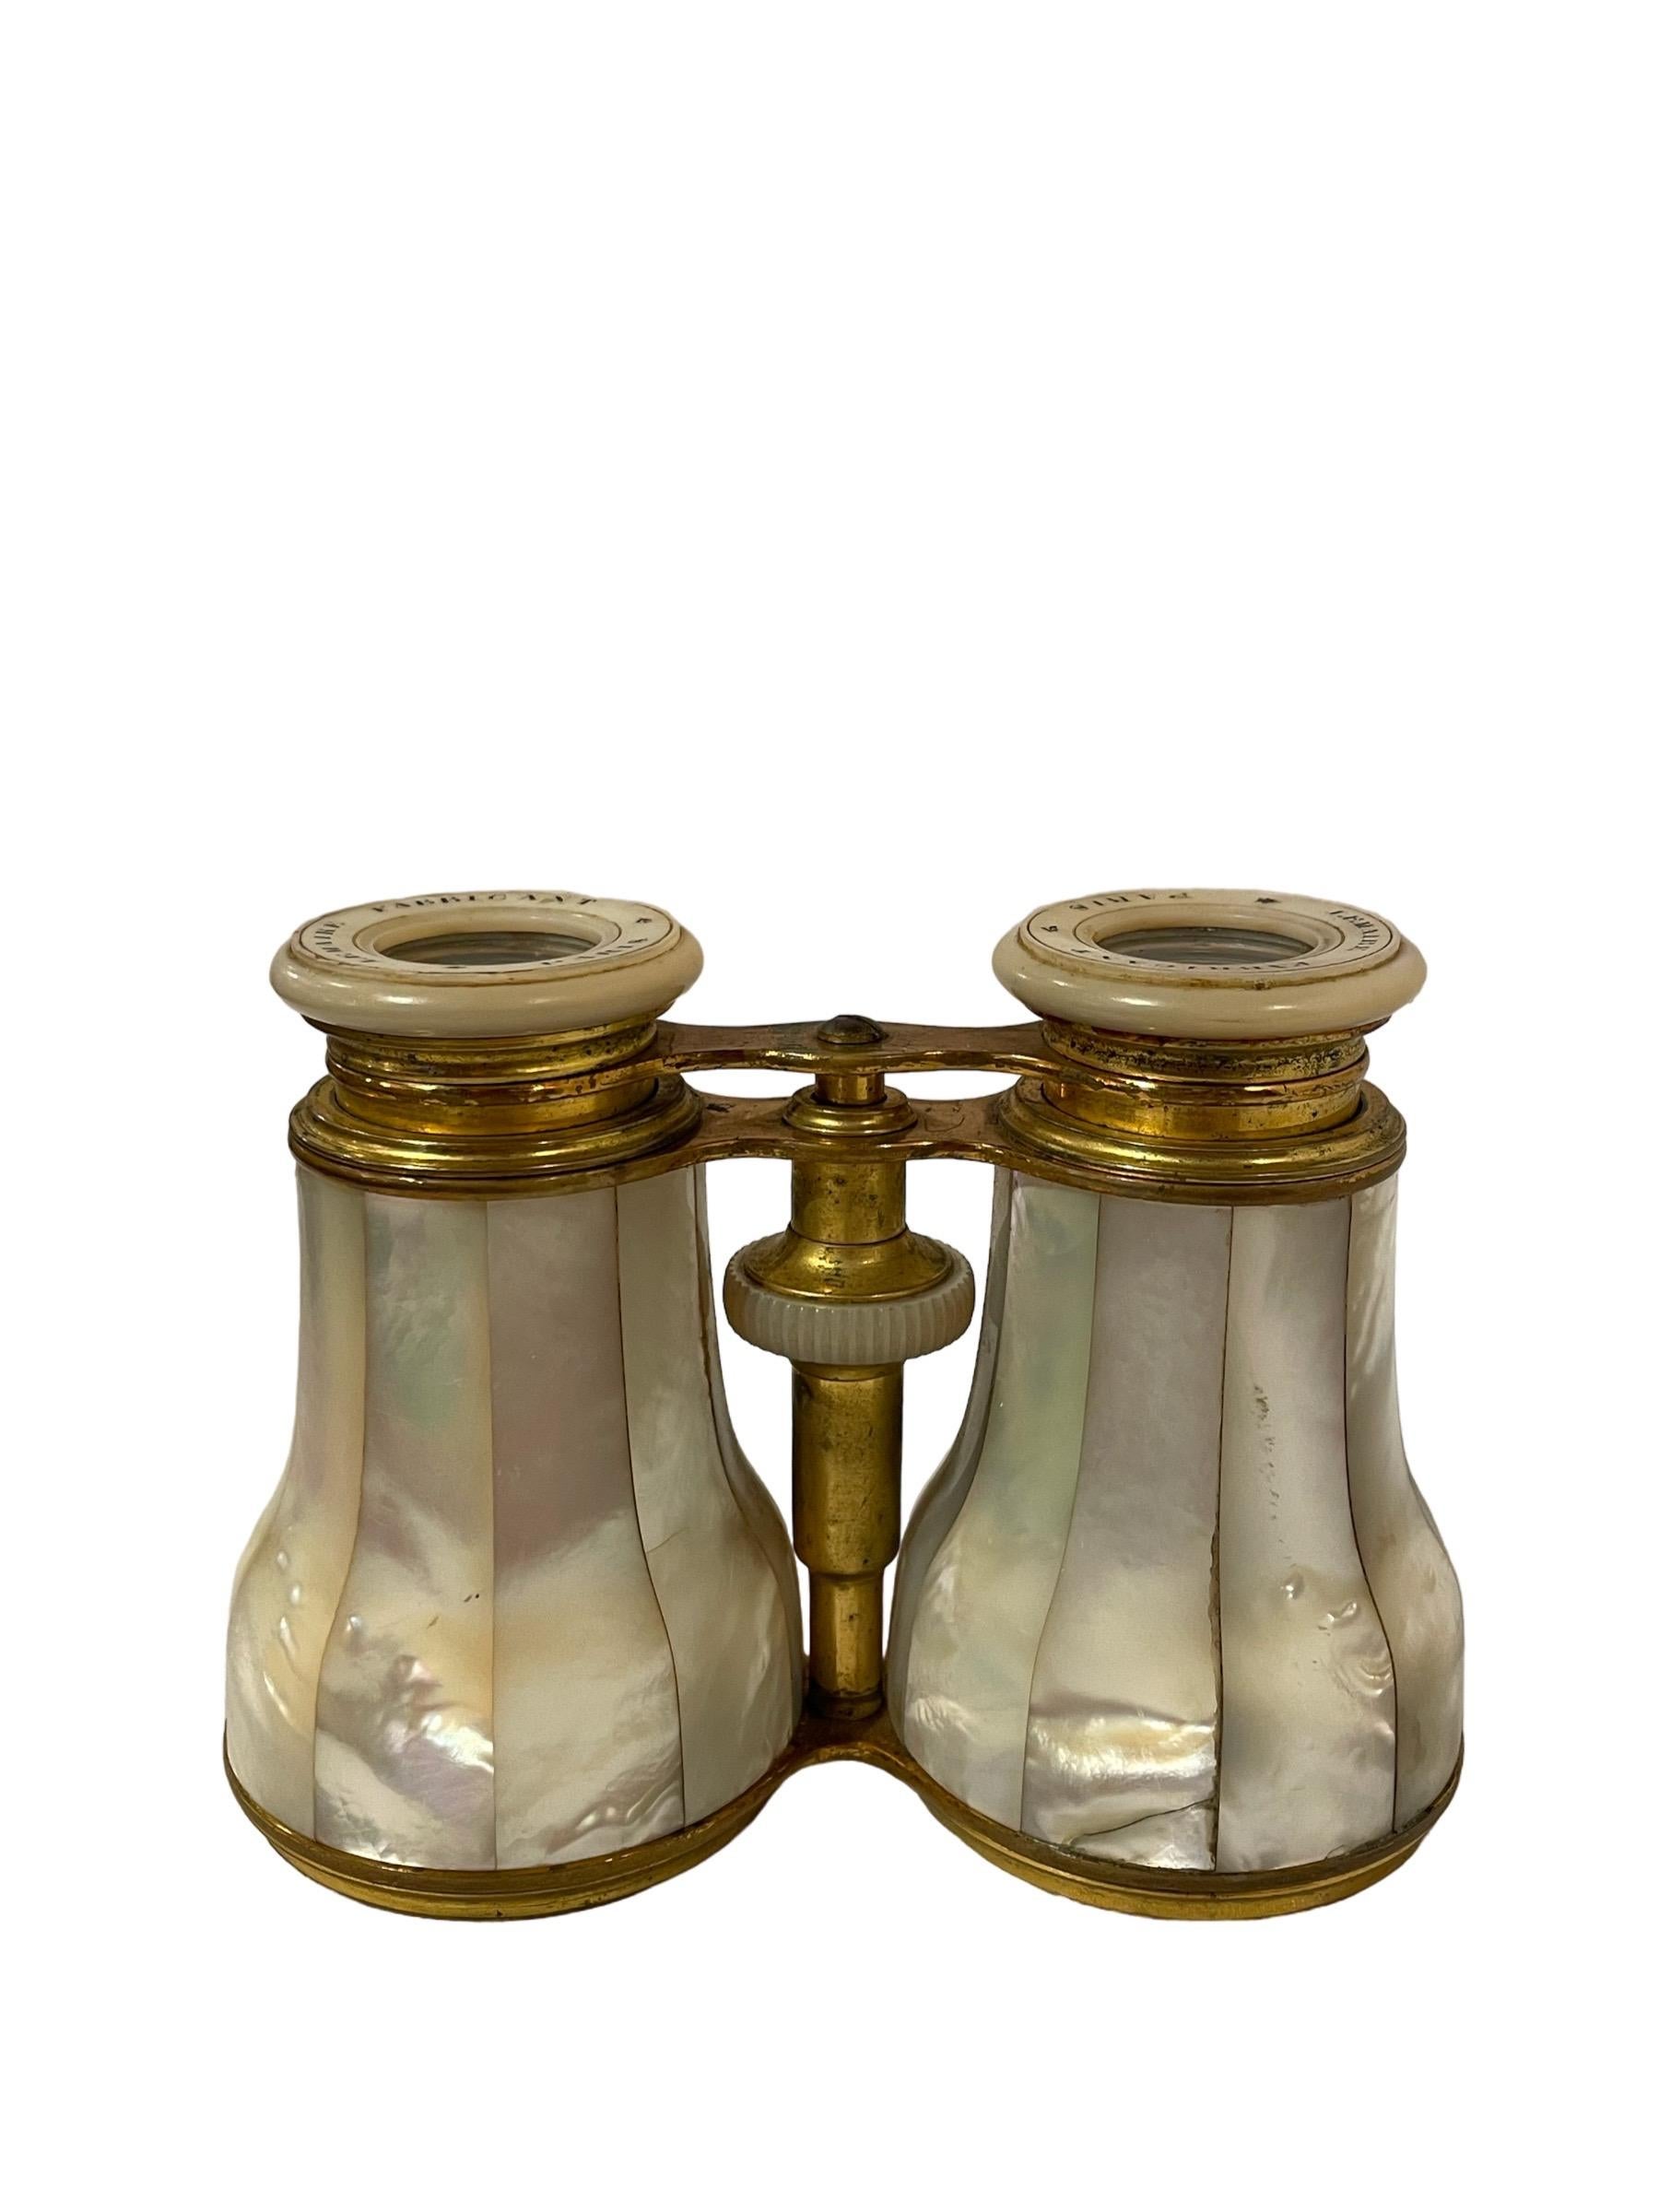 19th Century Antique Brass and Mother of Pearl Opera Glasses 

Miniature binoculars or opera glasses. Made of brass and mother of pearl panels. Made by Jacques LeMaire in Paris. 

Width: 2.5” - 1.5”
Length: 5”
Height: 3.5”